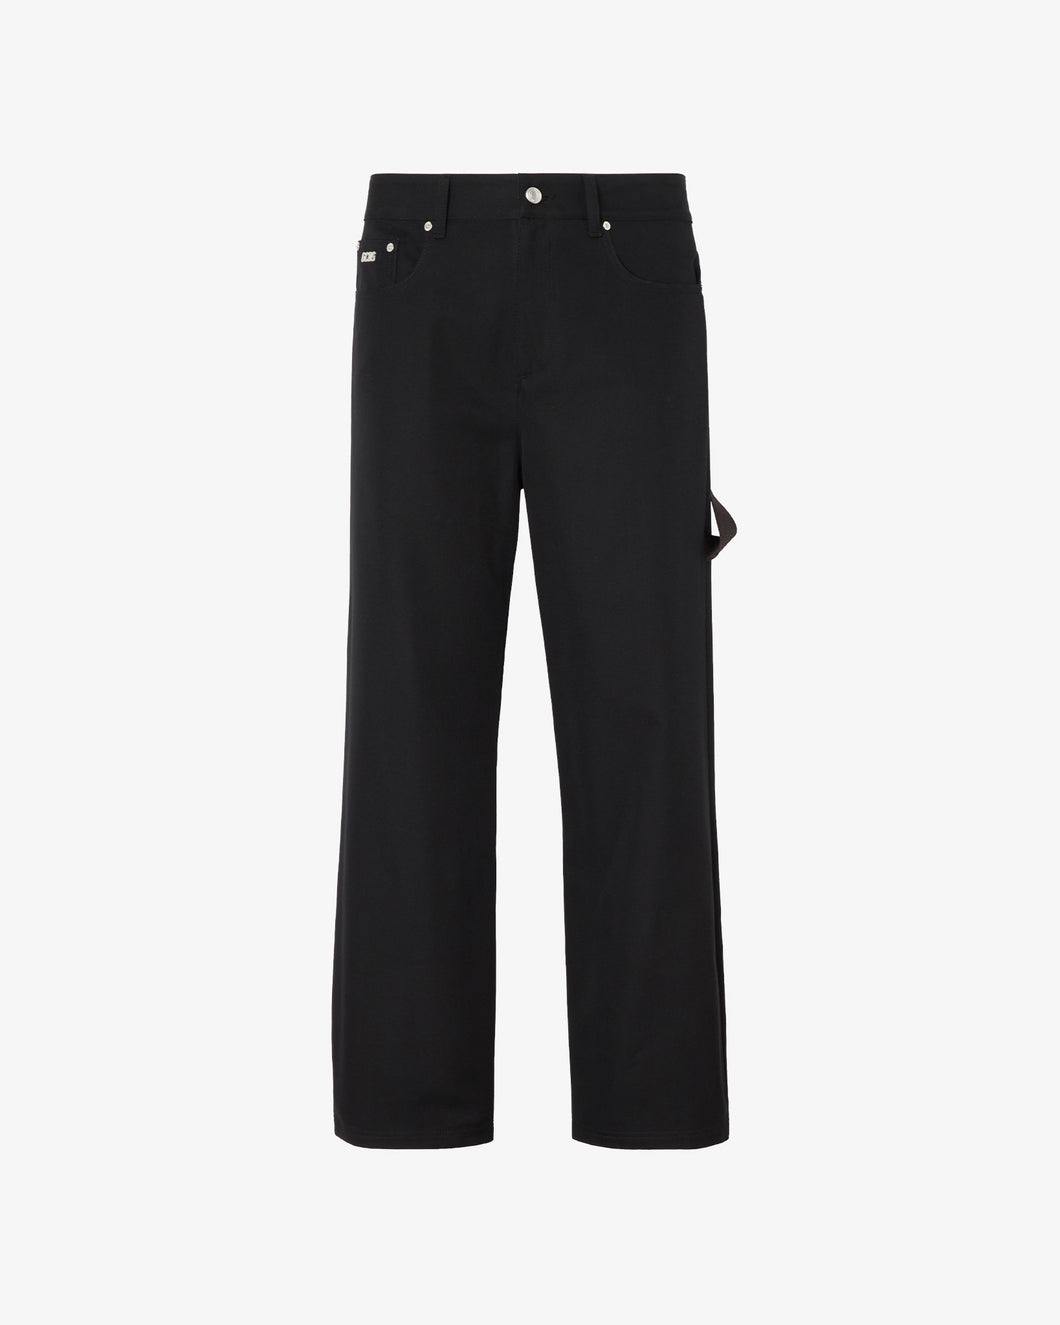 Cotton Canvas Ultrawide Trousers